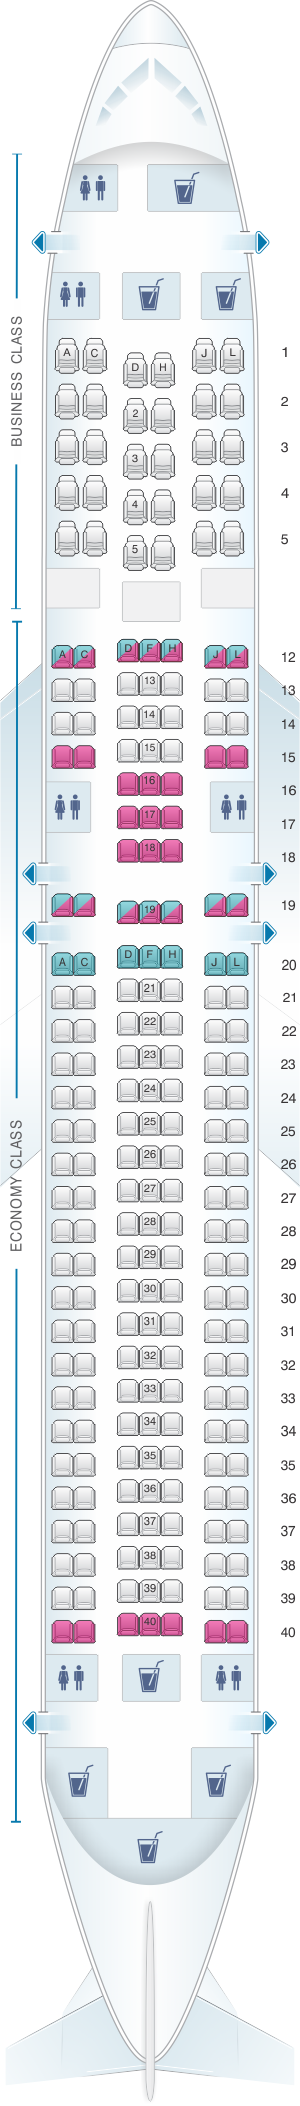 Seat map for LATAM Airlines Boeing B767 300